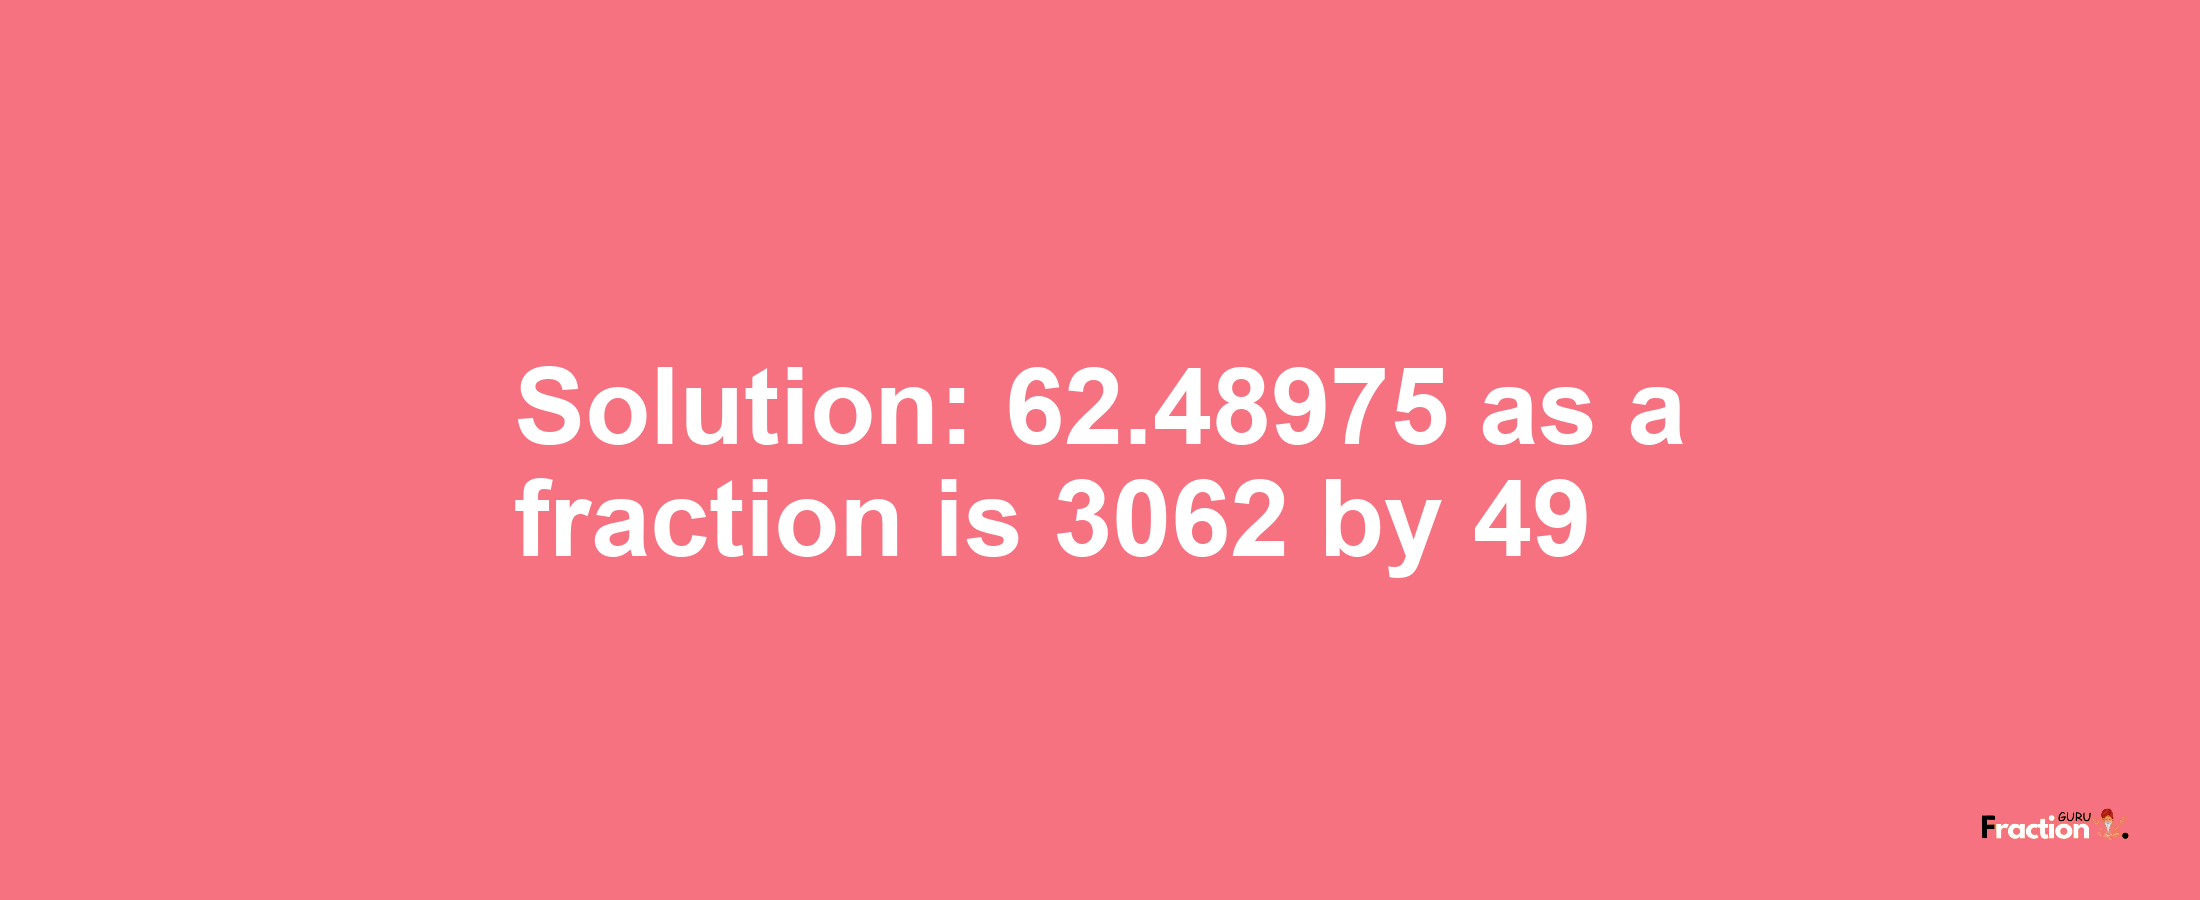 Solution:62.48975 as a fraction is 3062/49